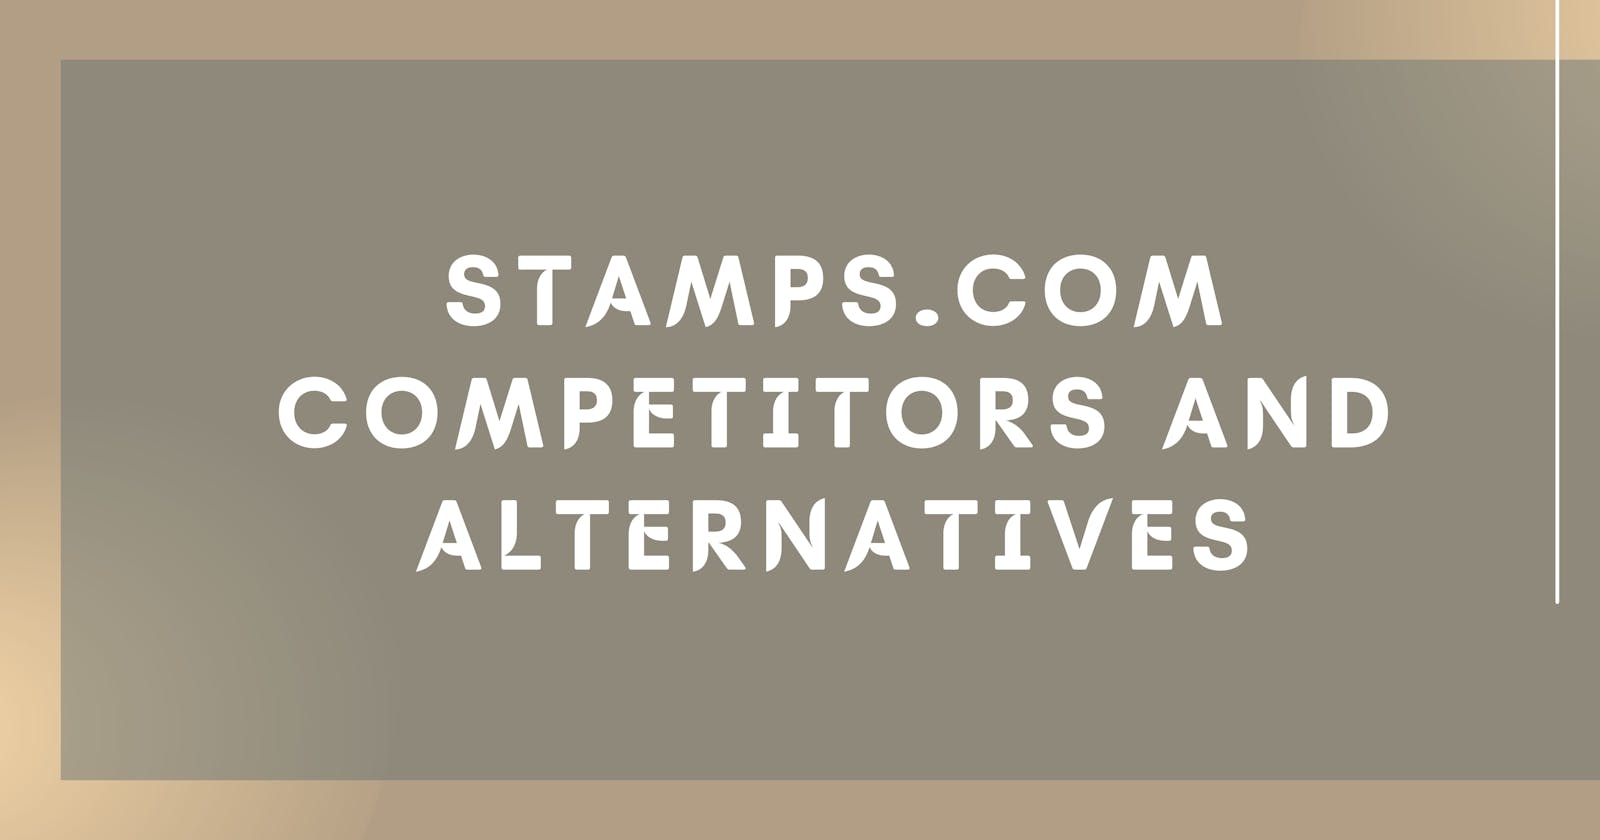 Stamps.com Competitors and Alternatives